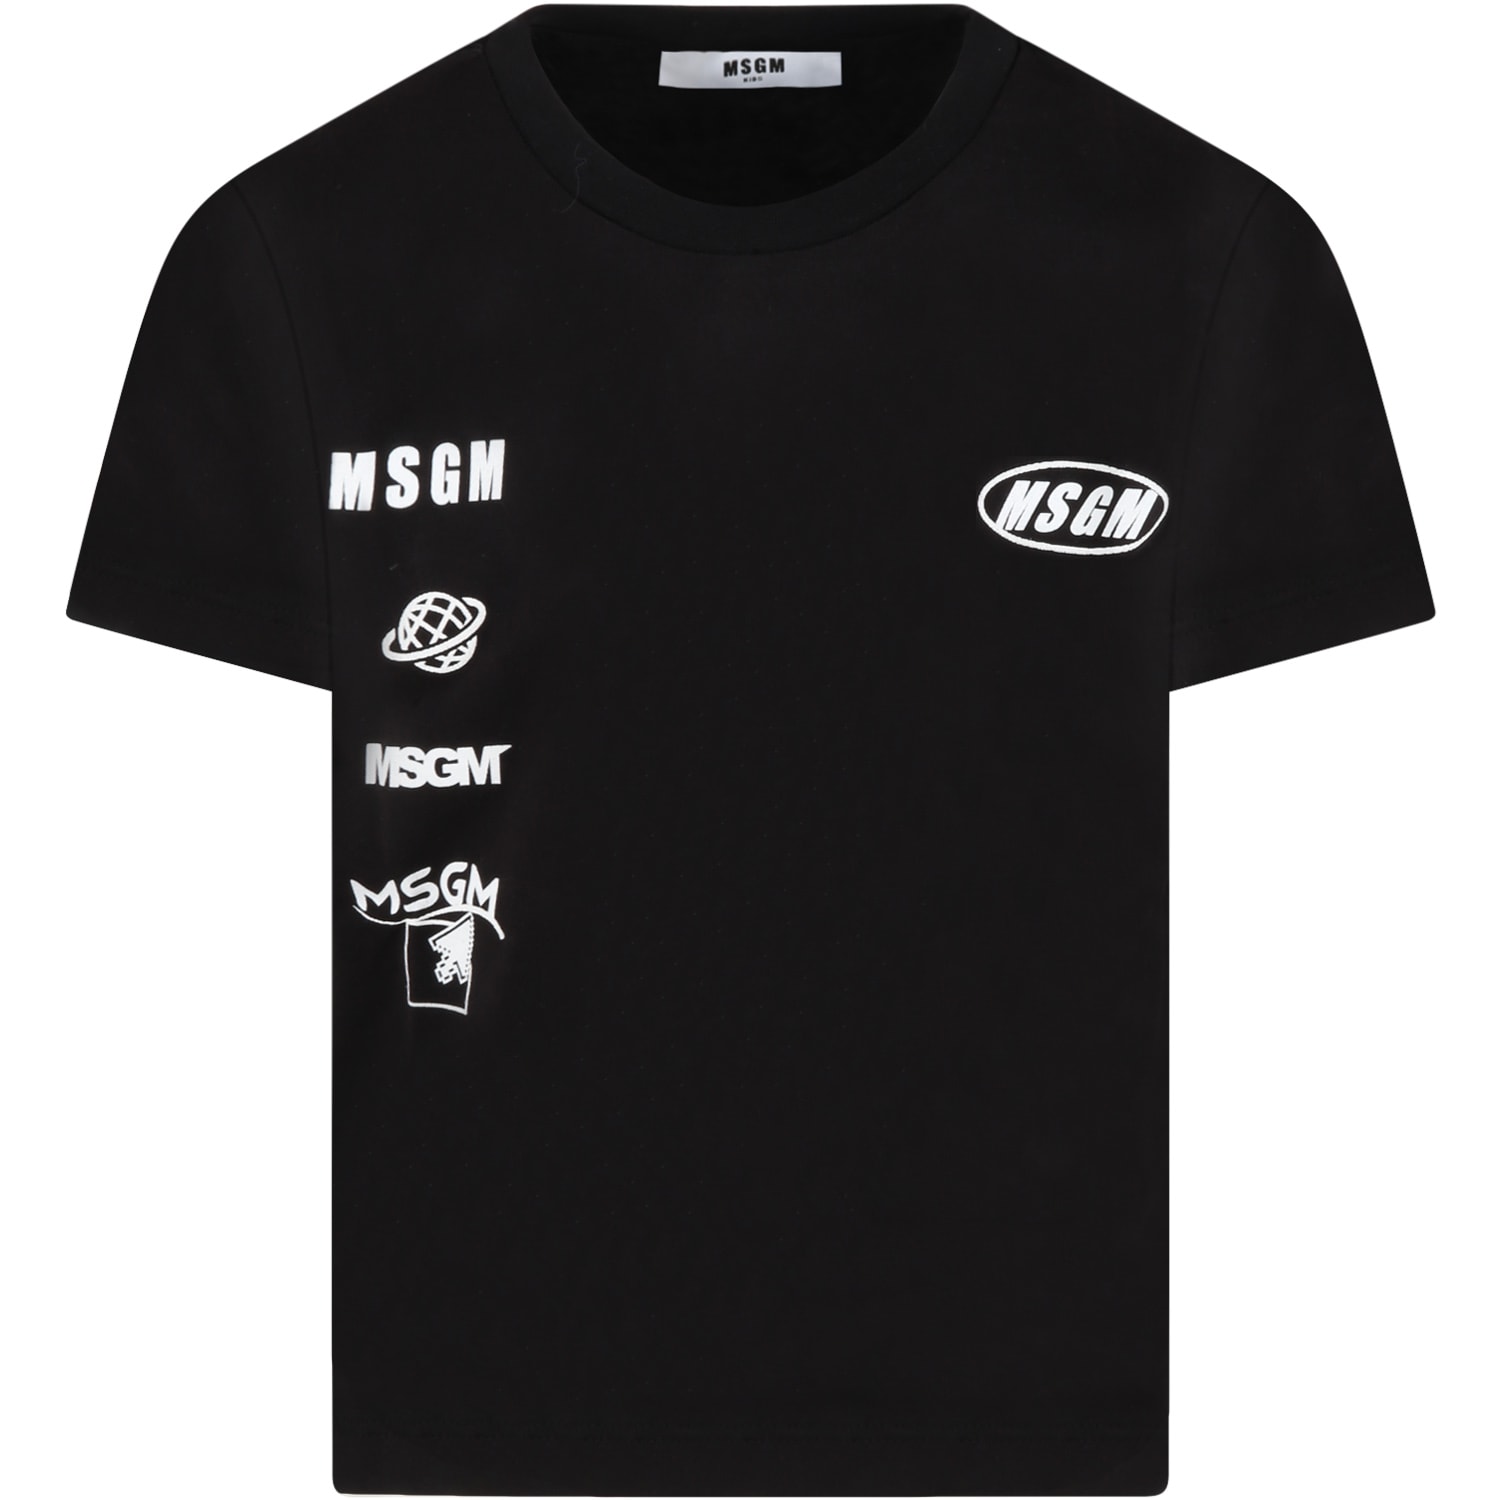 MSGM Black T-shirt For Kids With White Logos